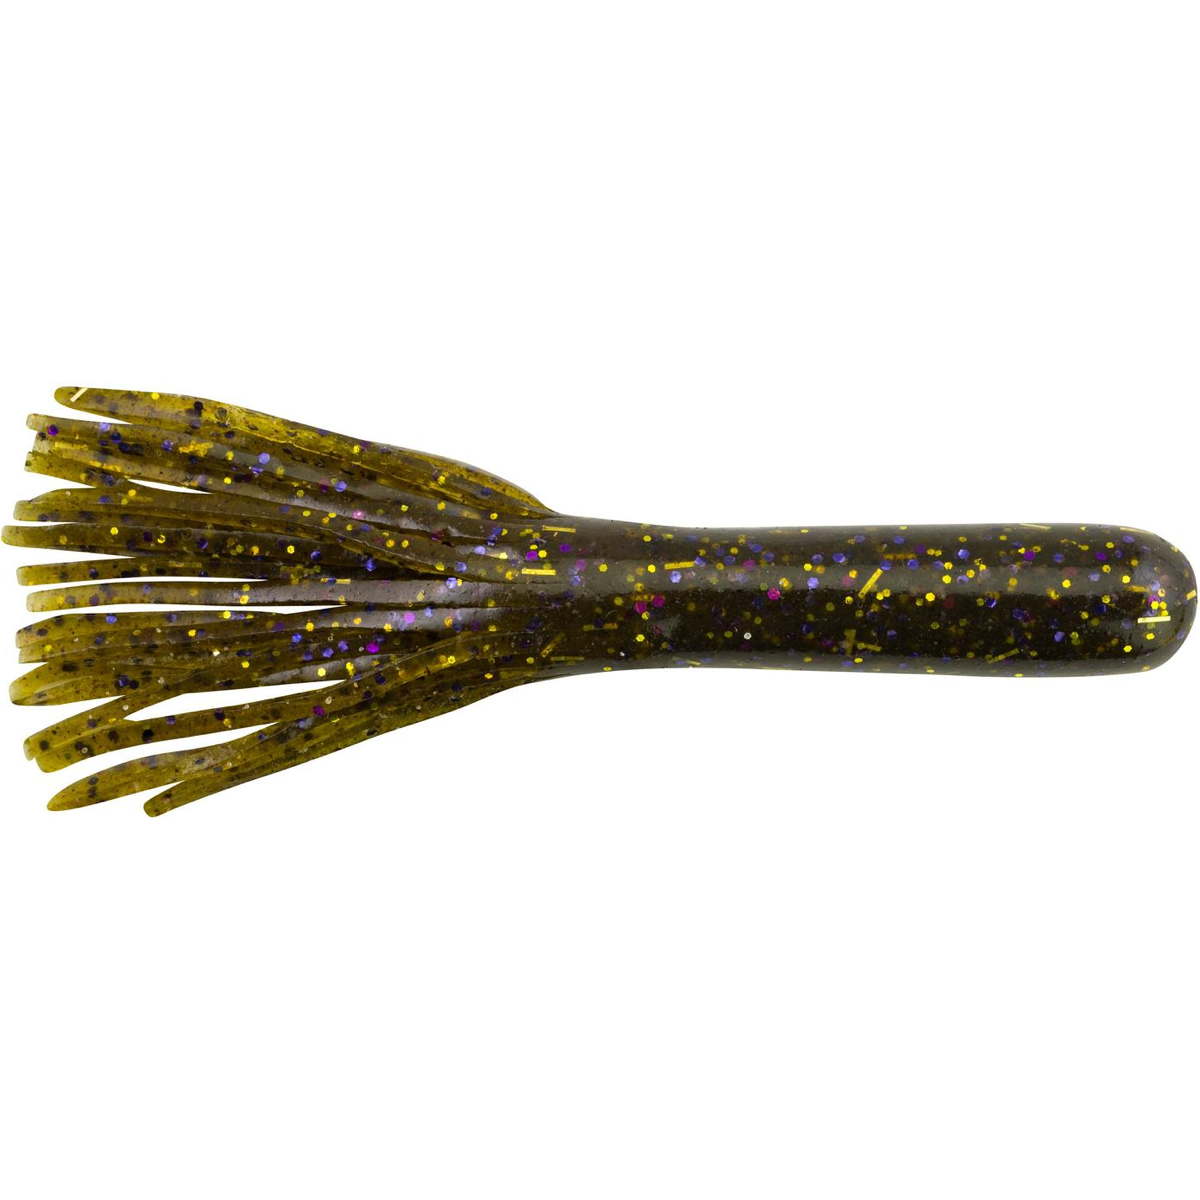 Photo of Berkley PowerBait Power Tube for sale at United Tackle Shops.